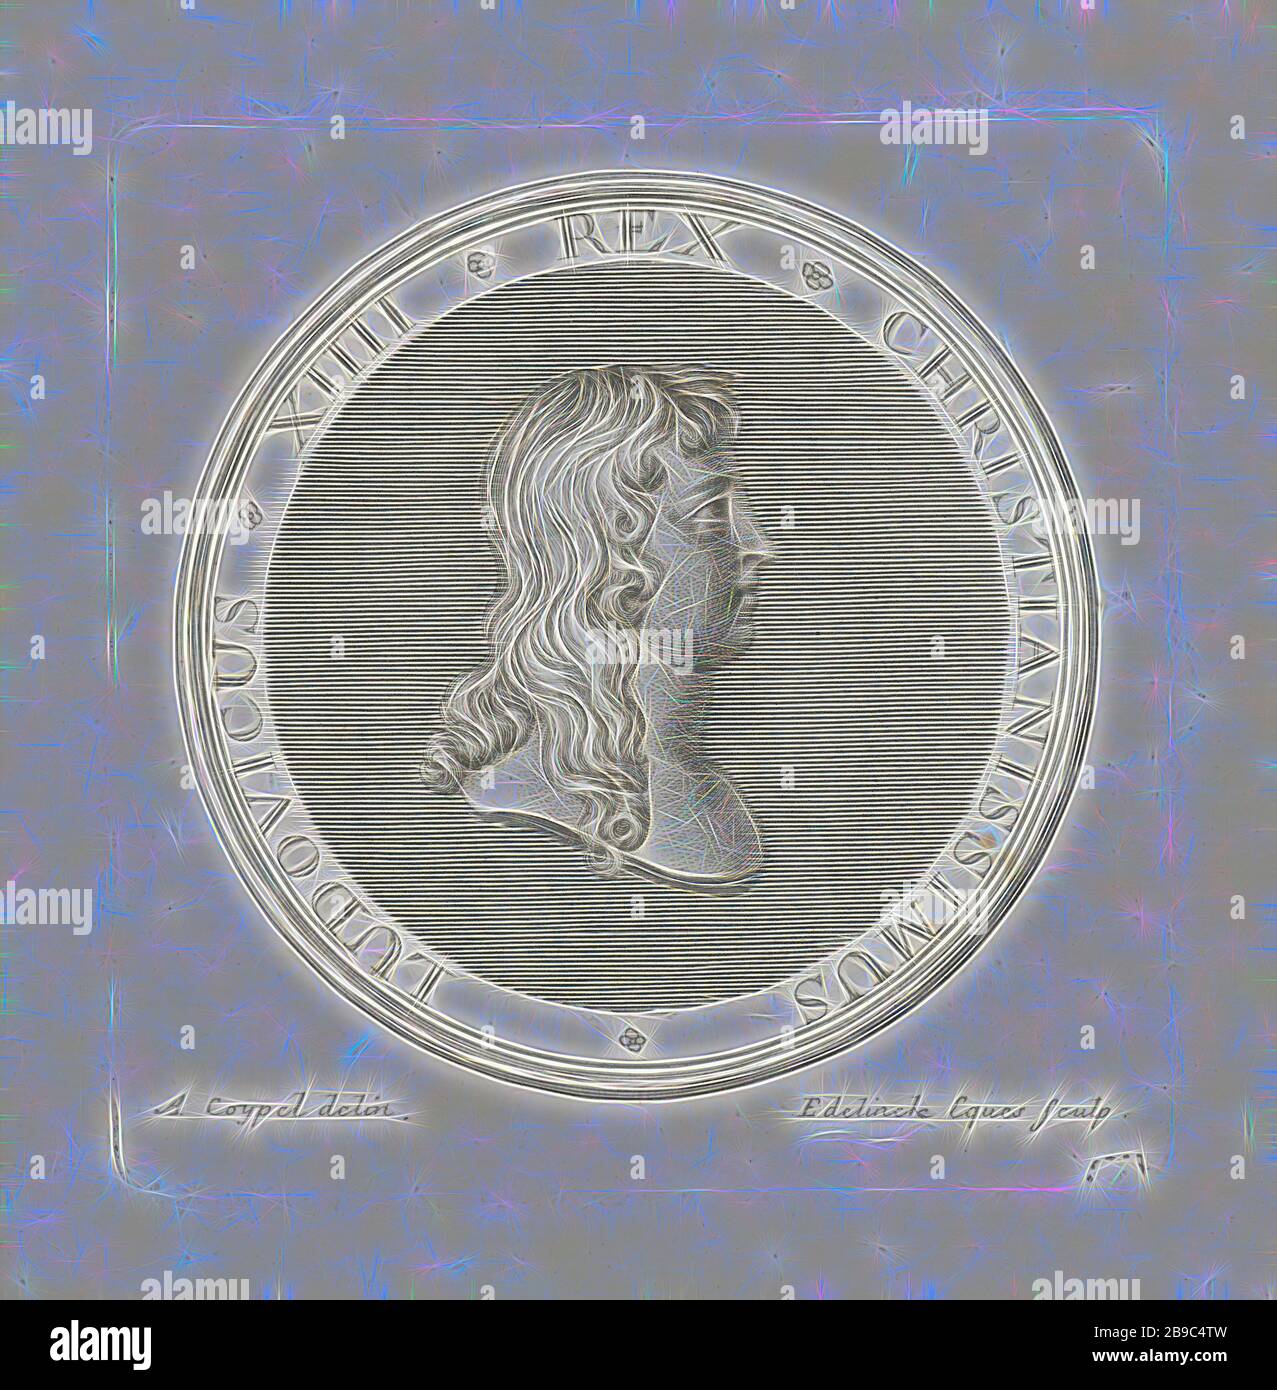 Medal with bust of Louis XIV, Front of a badge with bust and profile of Louis XIV, first issued after the Battle of Rocroi in 1643., Louis XIV (King of France), Gerard Edelinck (mentioned on object), Paris, 1702, paper, engraving, h 82 mm × w 81 mm, Reimagined by Gibon, design of warm cheerful glowing of brightness and light rays radiance. Classic art reinvented with a modern twist. Photography inspired by futurism, embracing dynamic energy of modern technology, movement, speed and revolutionize culture. Stock Photo